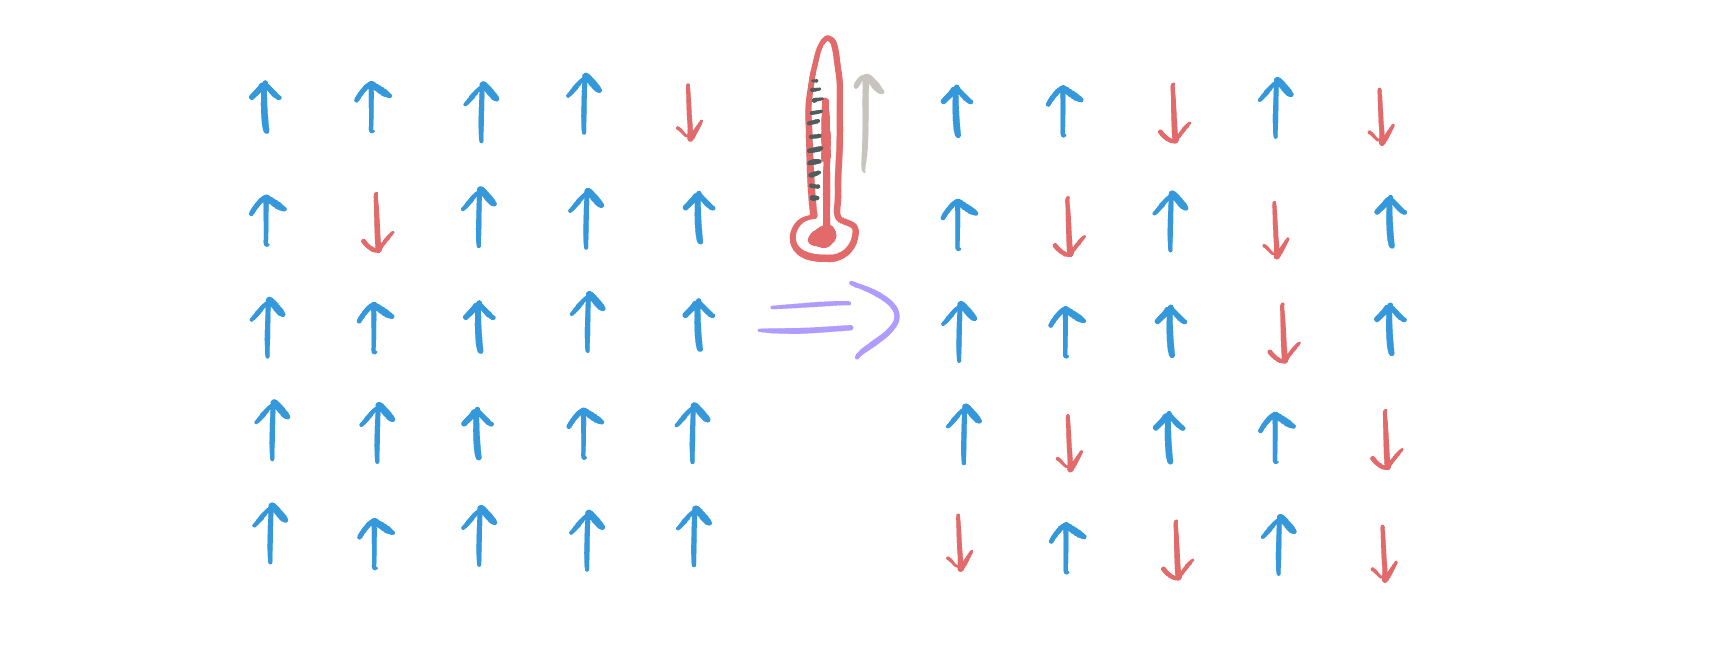 Diagram of the Ising model showing aligned particles with low temperature and less alignment as temperature induces chaos